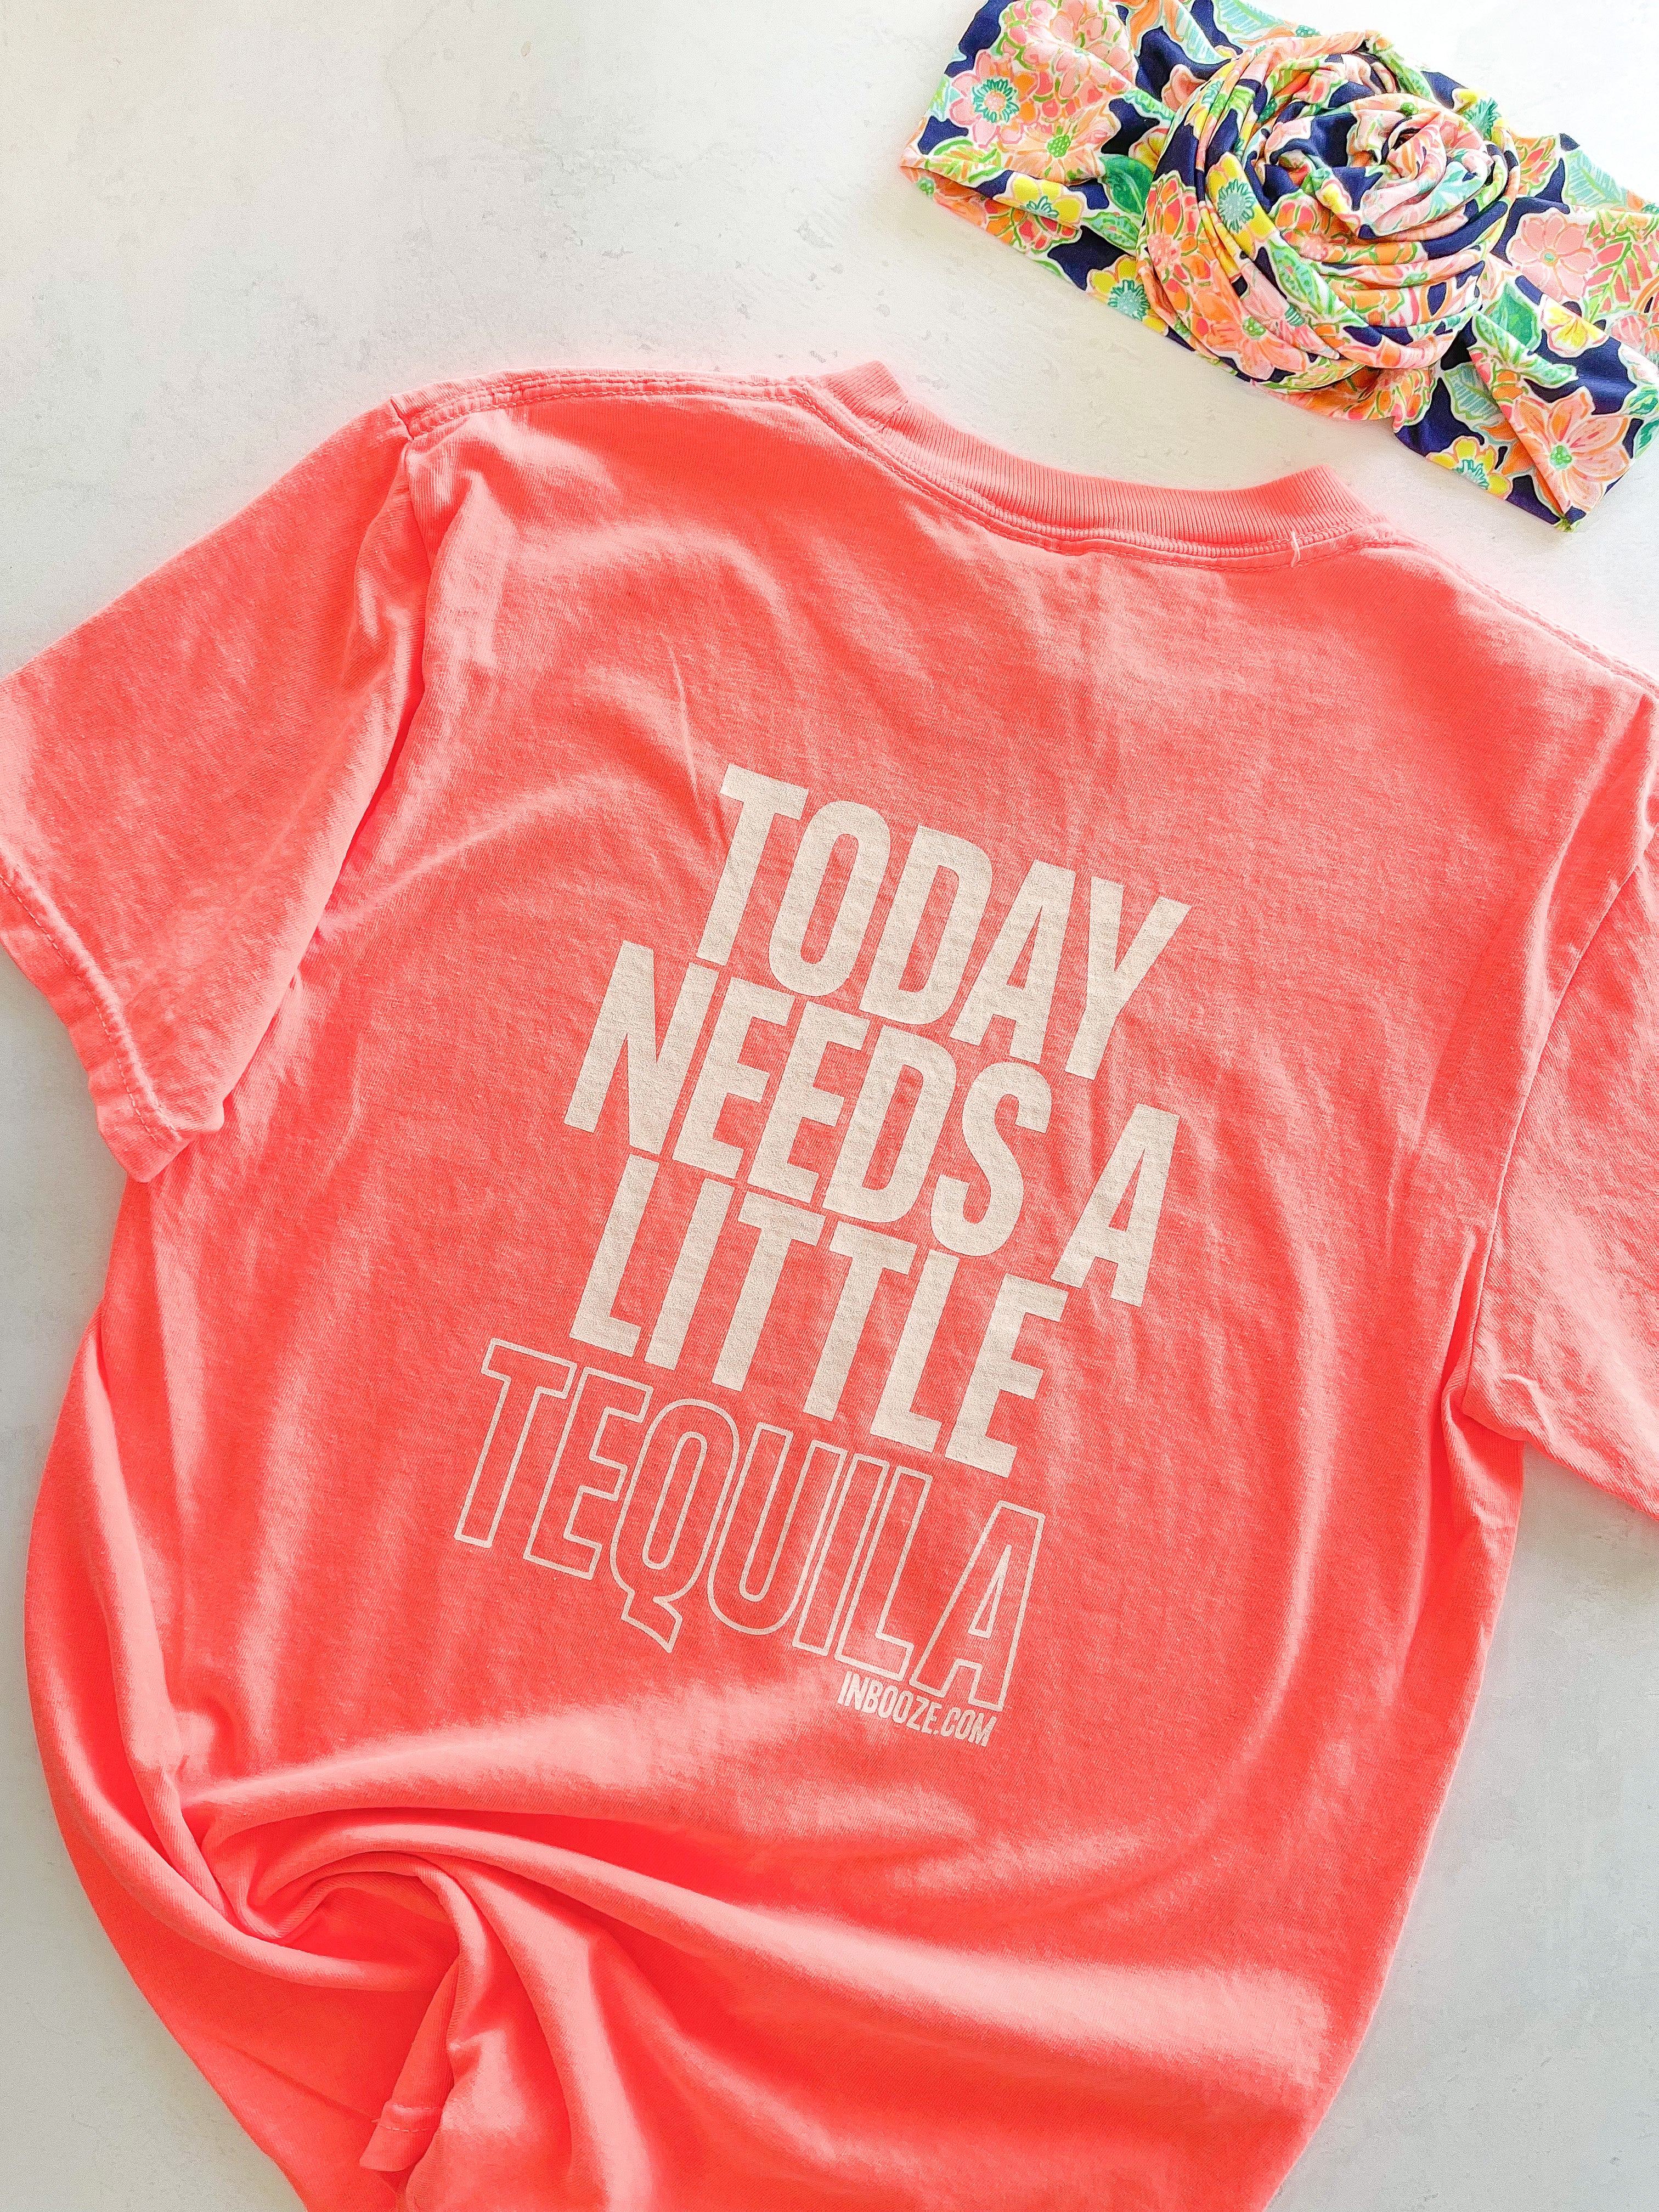 "Today Needs a Little Tequila" Neon Red Tee